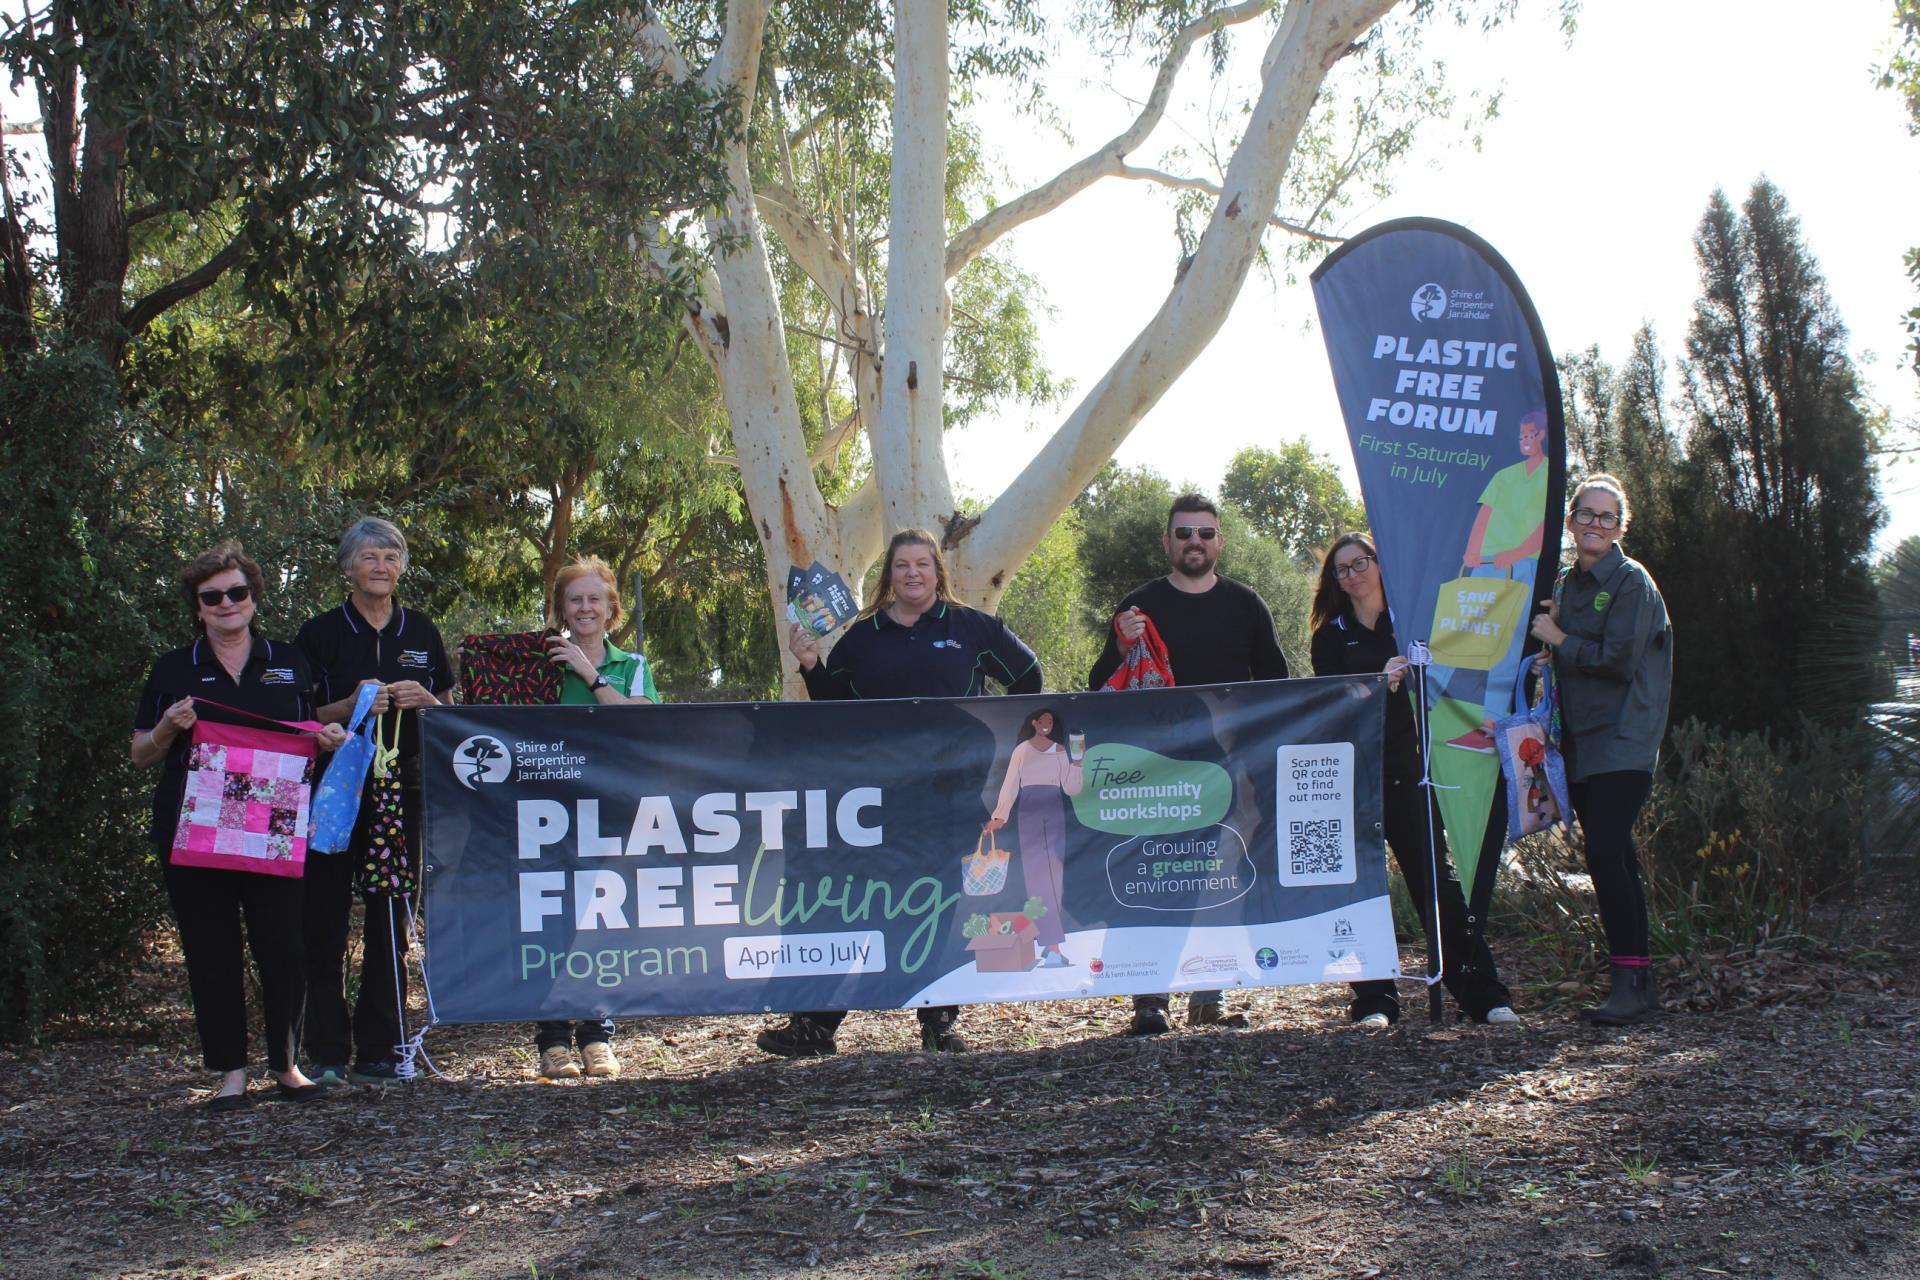 Shire hosts Plastic Free Living Forum on July 1st for the Local Community